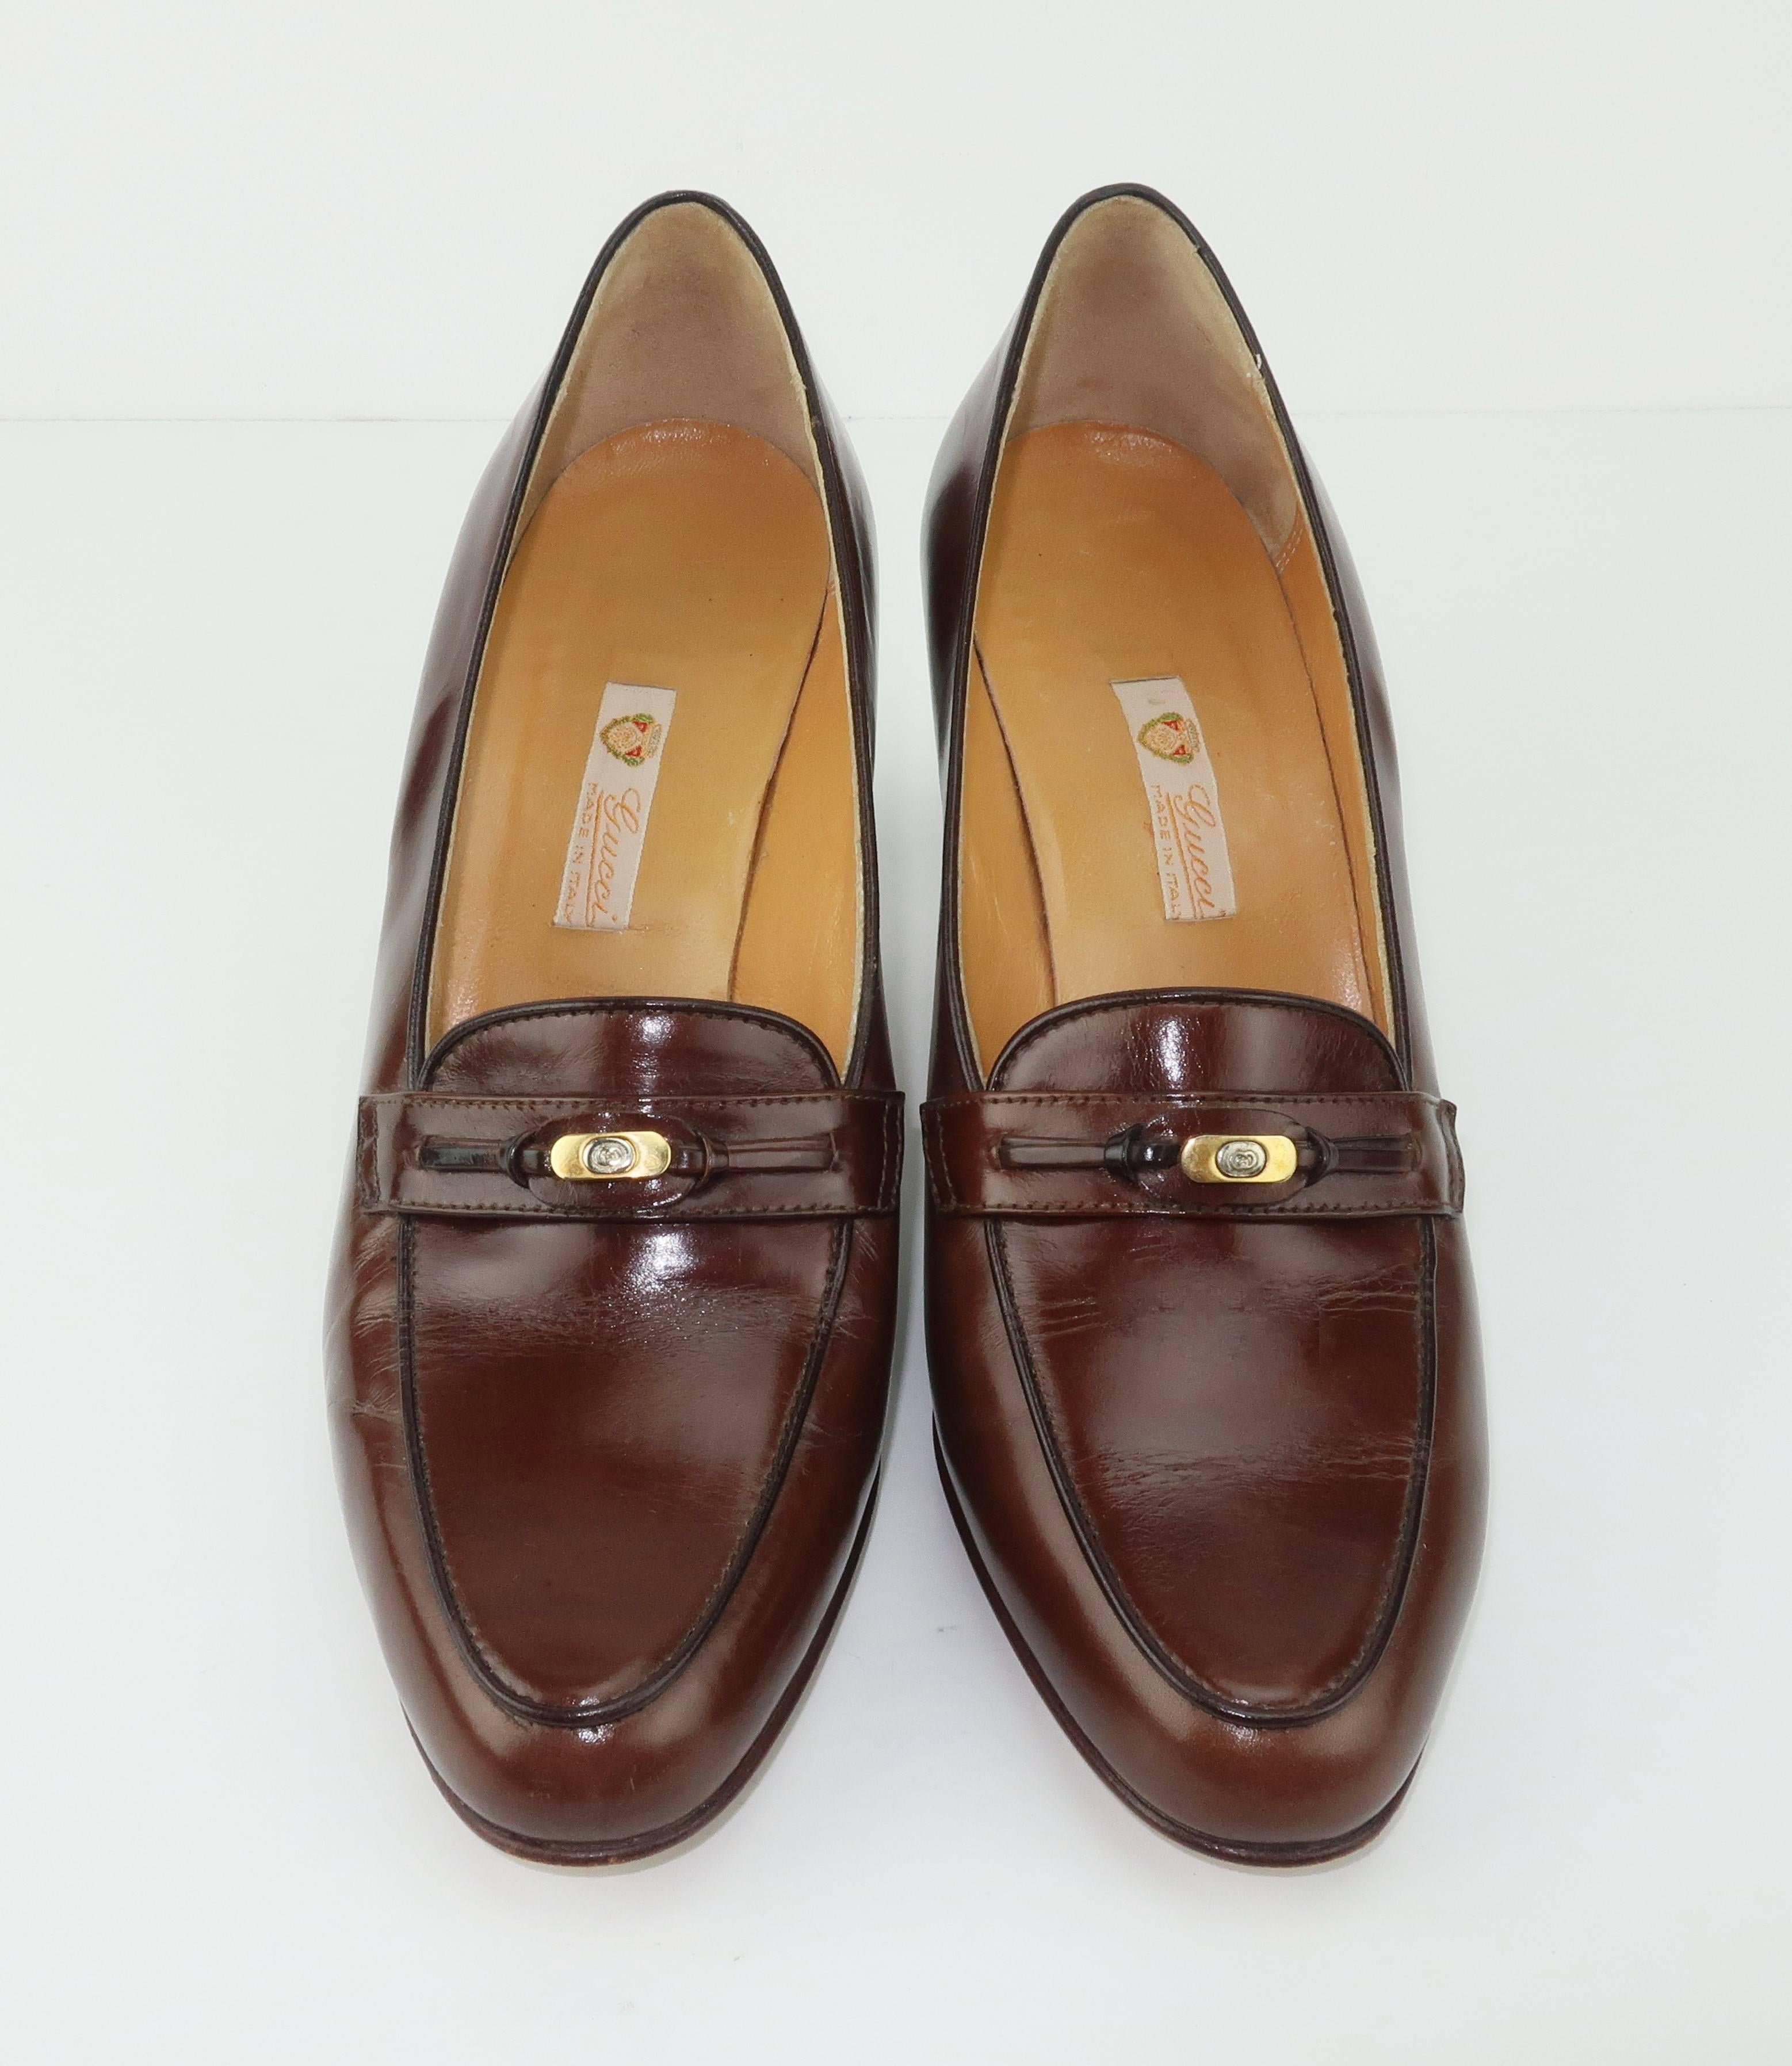 This preppy dark brown leather Gucci loafer is a classic paired with trousers, skirts or jeans. The vamp is decorated with a leather detail accented by a Gucci logo medallion in gold and silver metal.  The stacked wood heel is a comfortable